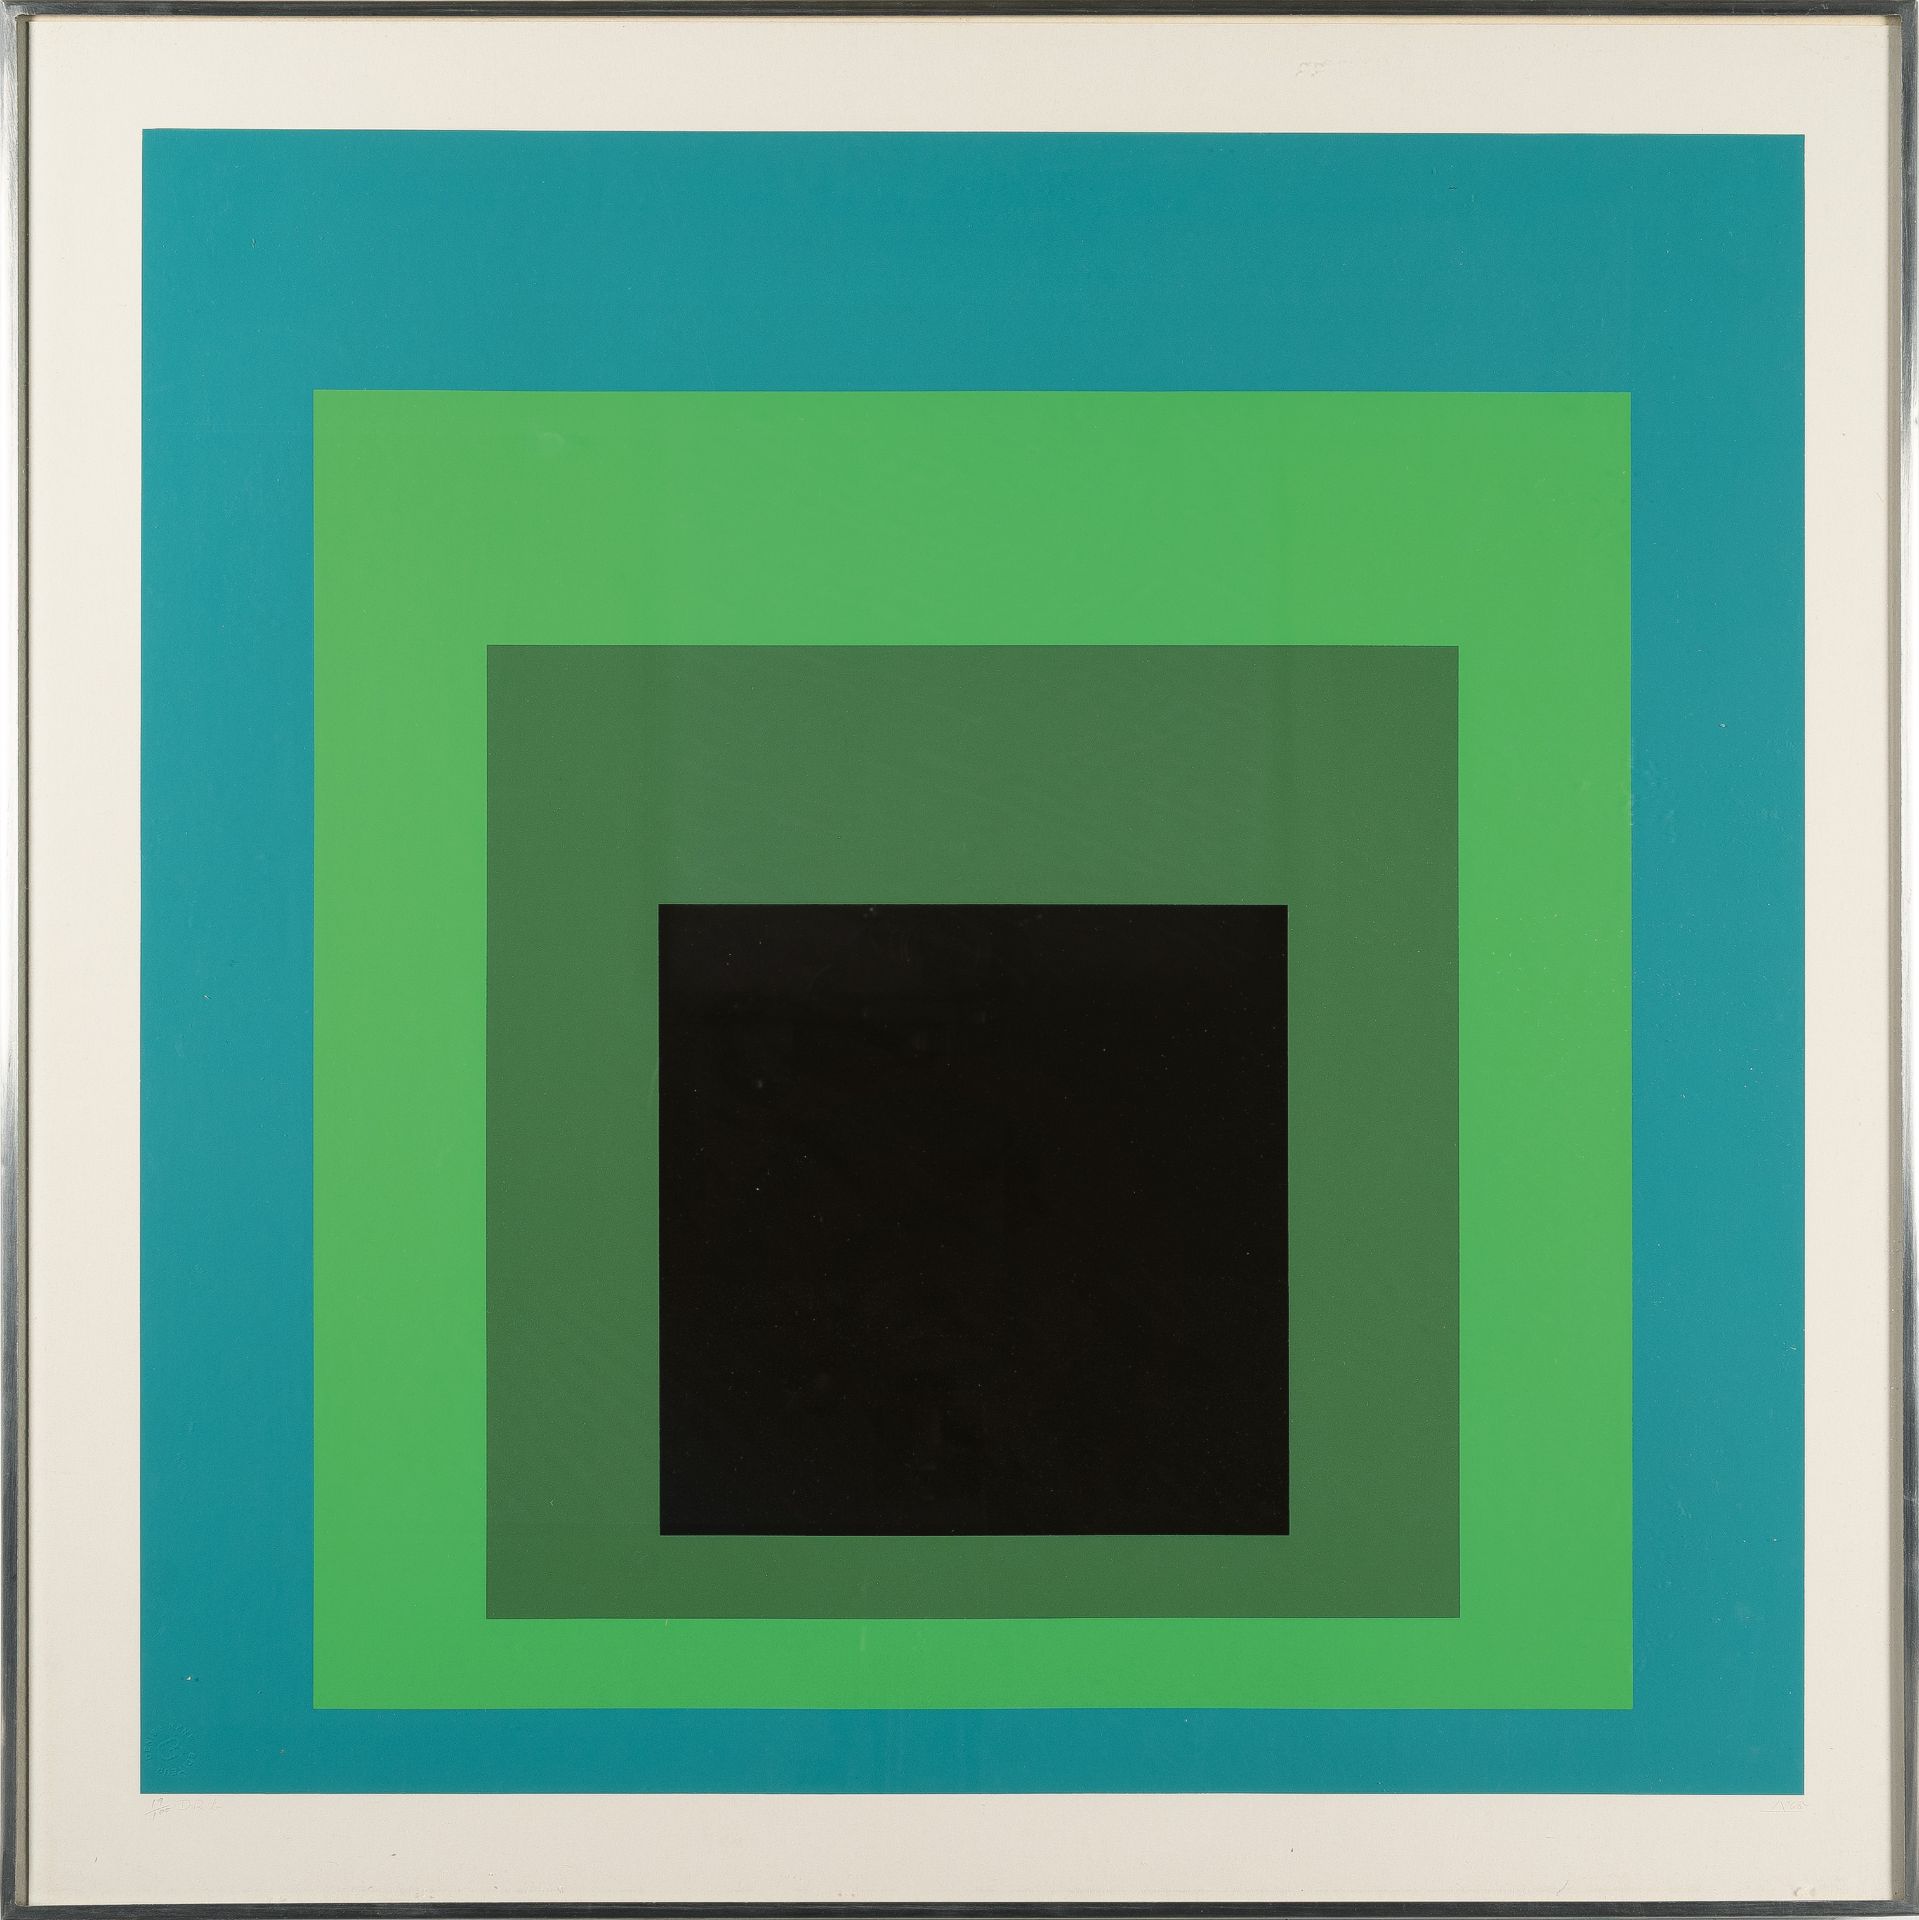 Josef Albers (1888 Bottrop - New Haven 1976), “DR-b”Silkscreen in colours on cardboard. (19)68. - Image 4 of 4